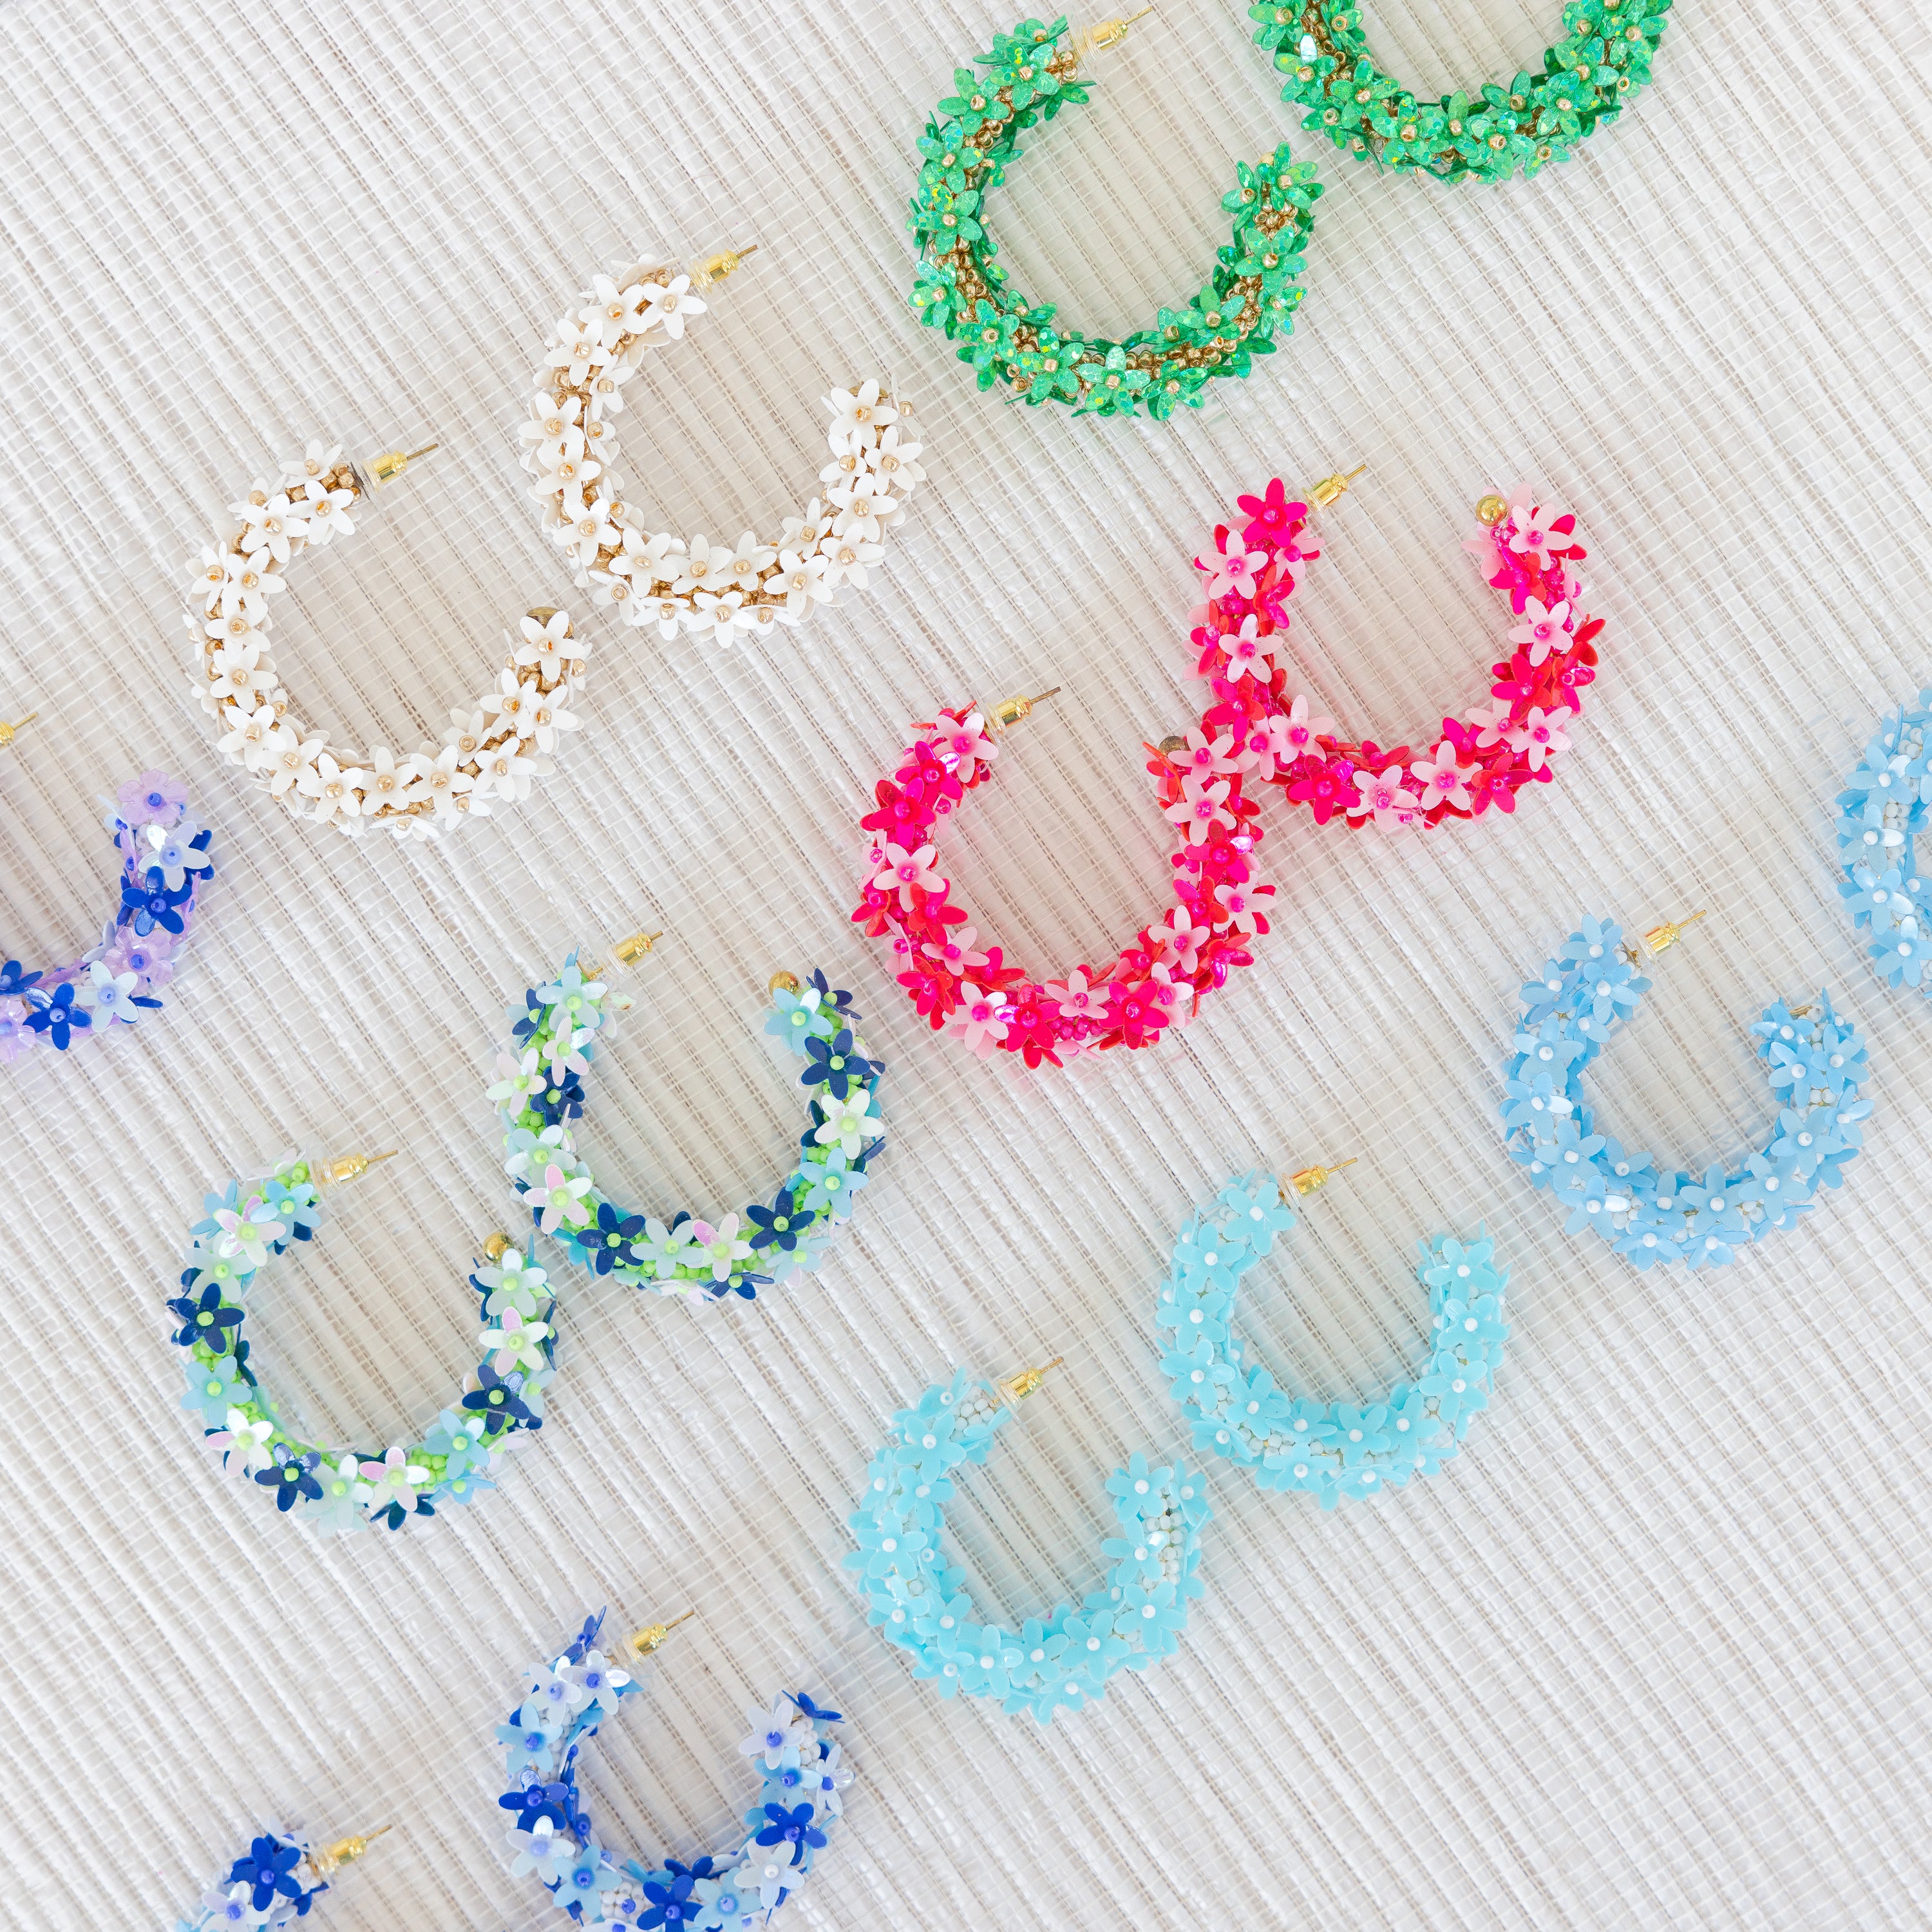 Flower Hoops in Shades of Green & Blue